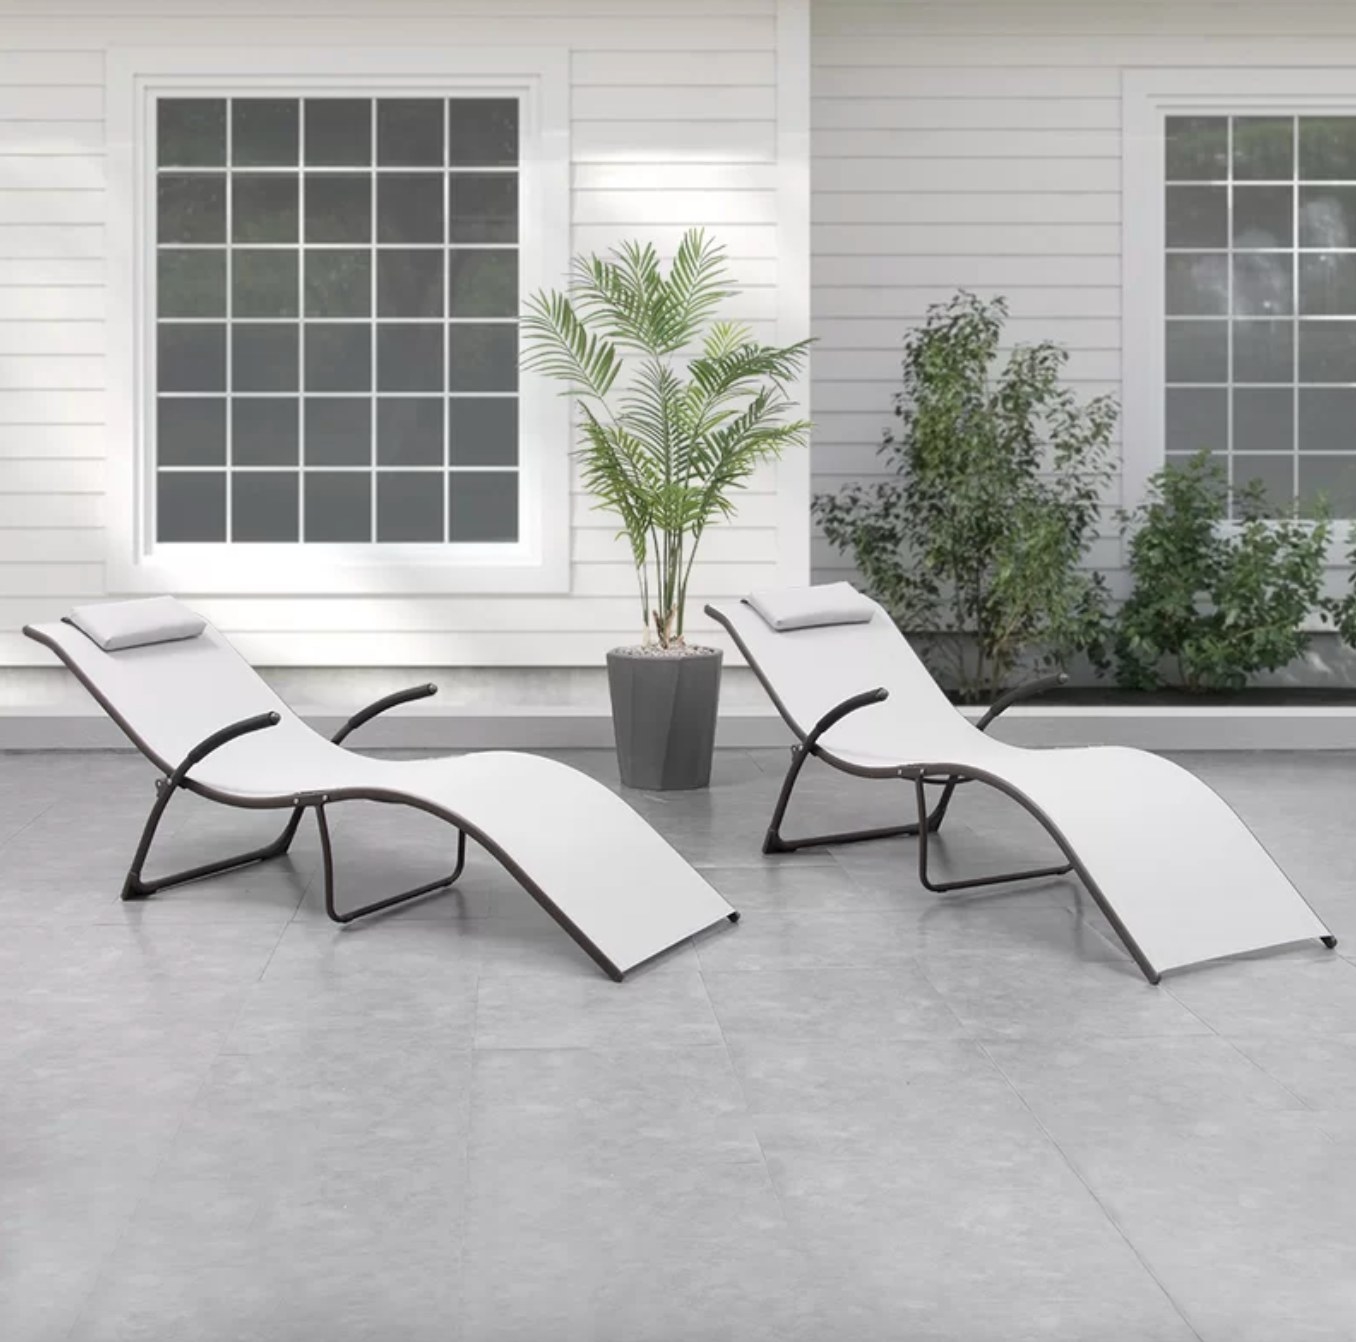 the light grey swoopy shaped chaises in a decorated outdoor space